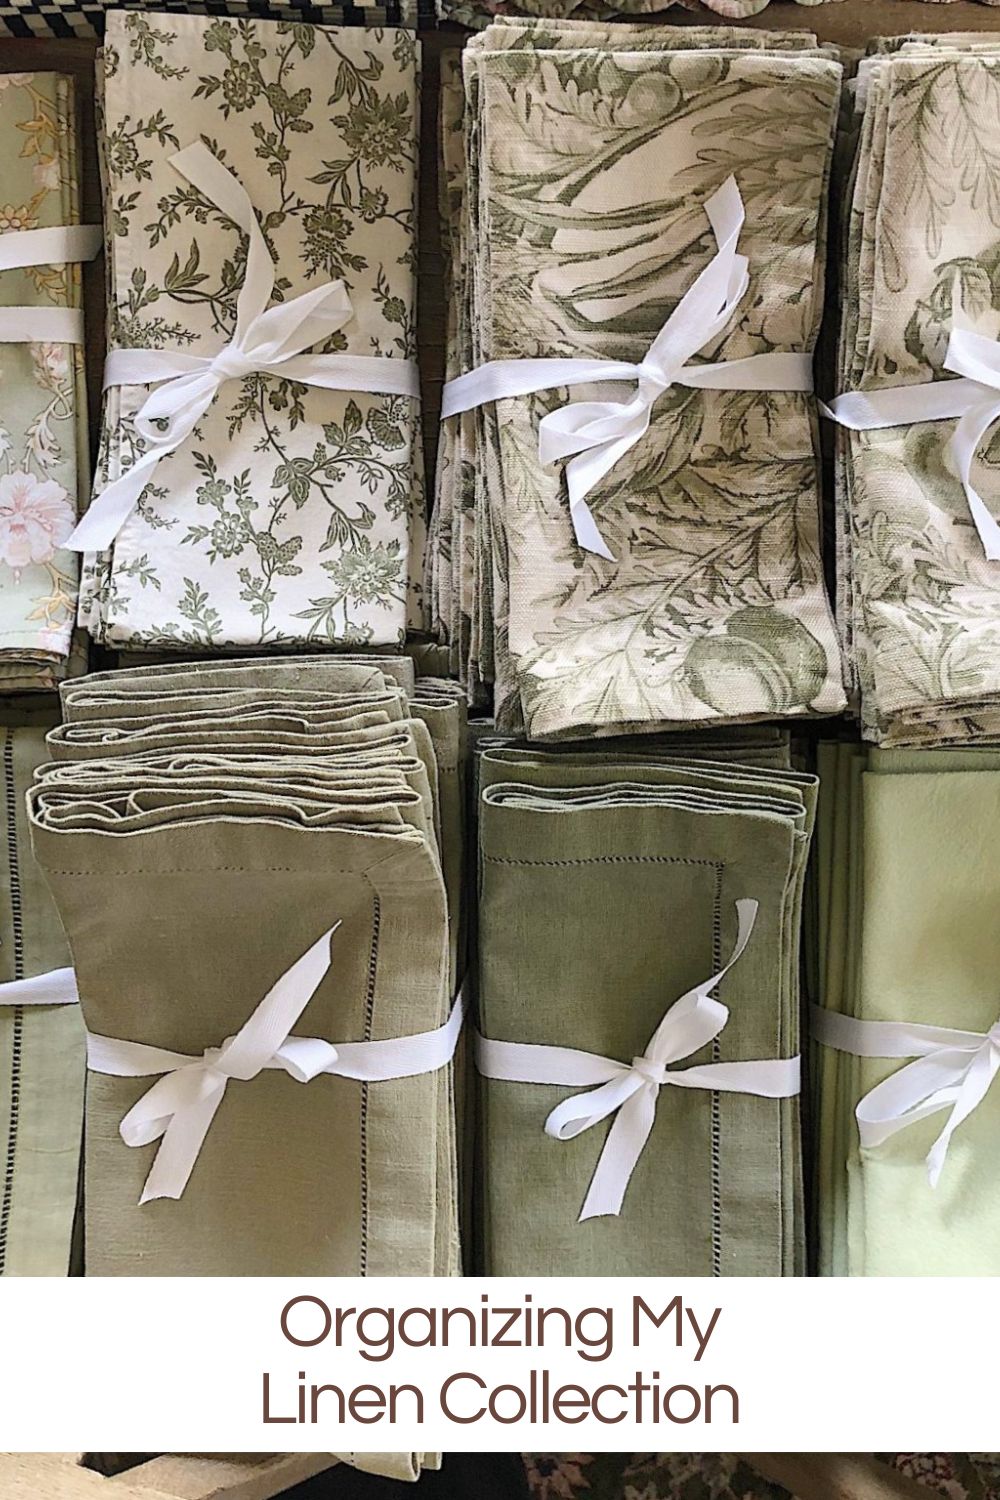 It wasn't until I wrote the title of this blog post that I realized I had a linen "collection." Actually, I might have a linen hoarding problem.